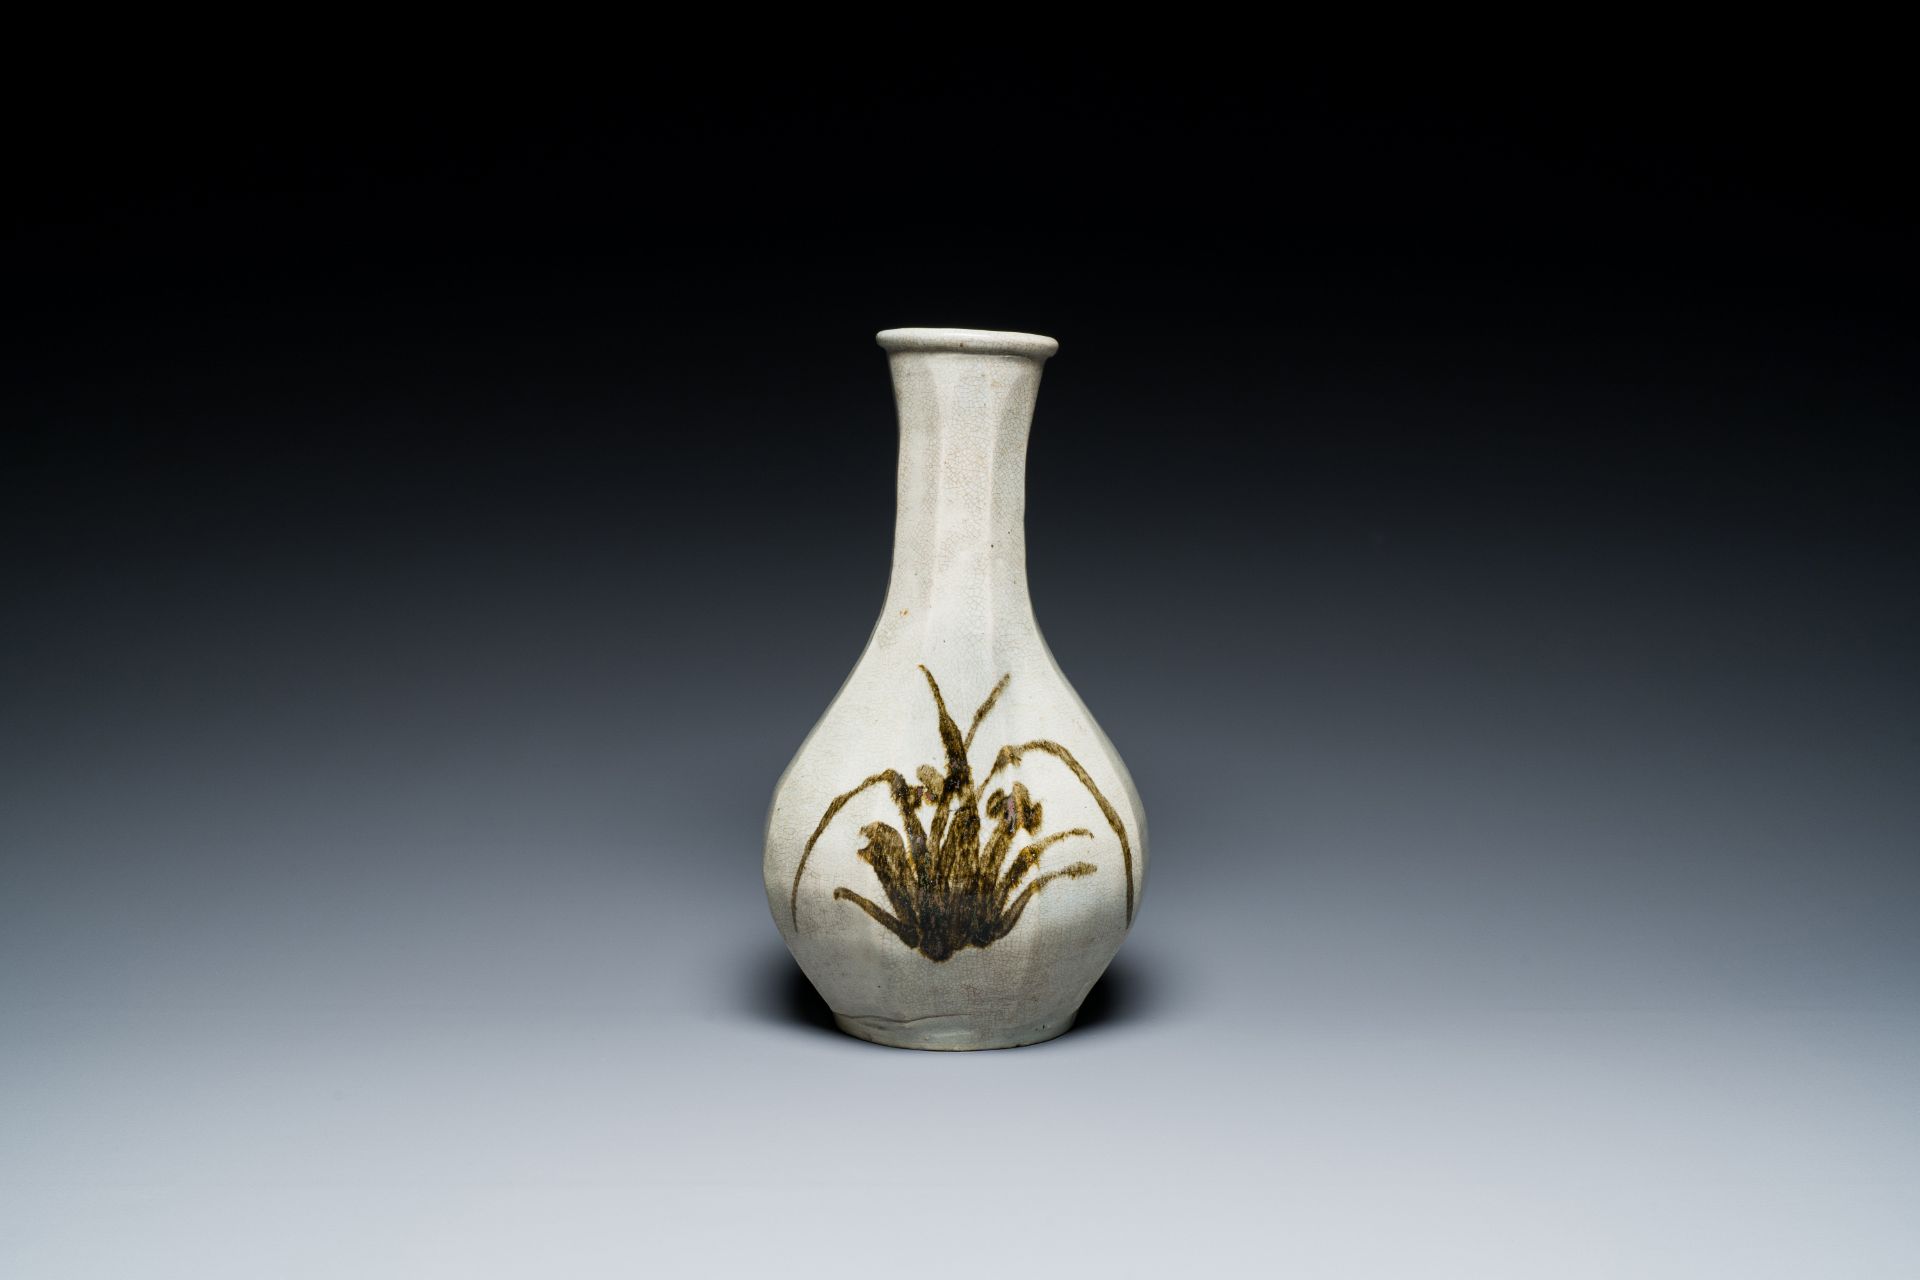 A Korean bottle vase with floral design, Joseon dynasty, 16th C. - Image 3 of 6